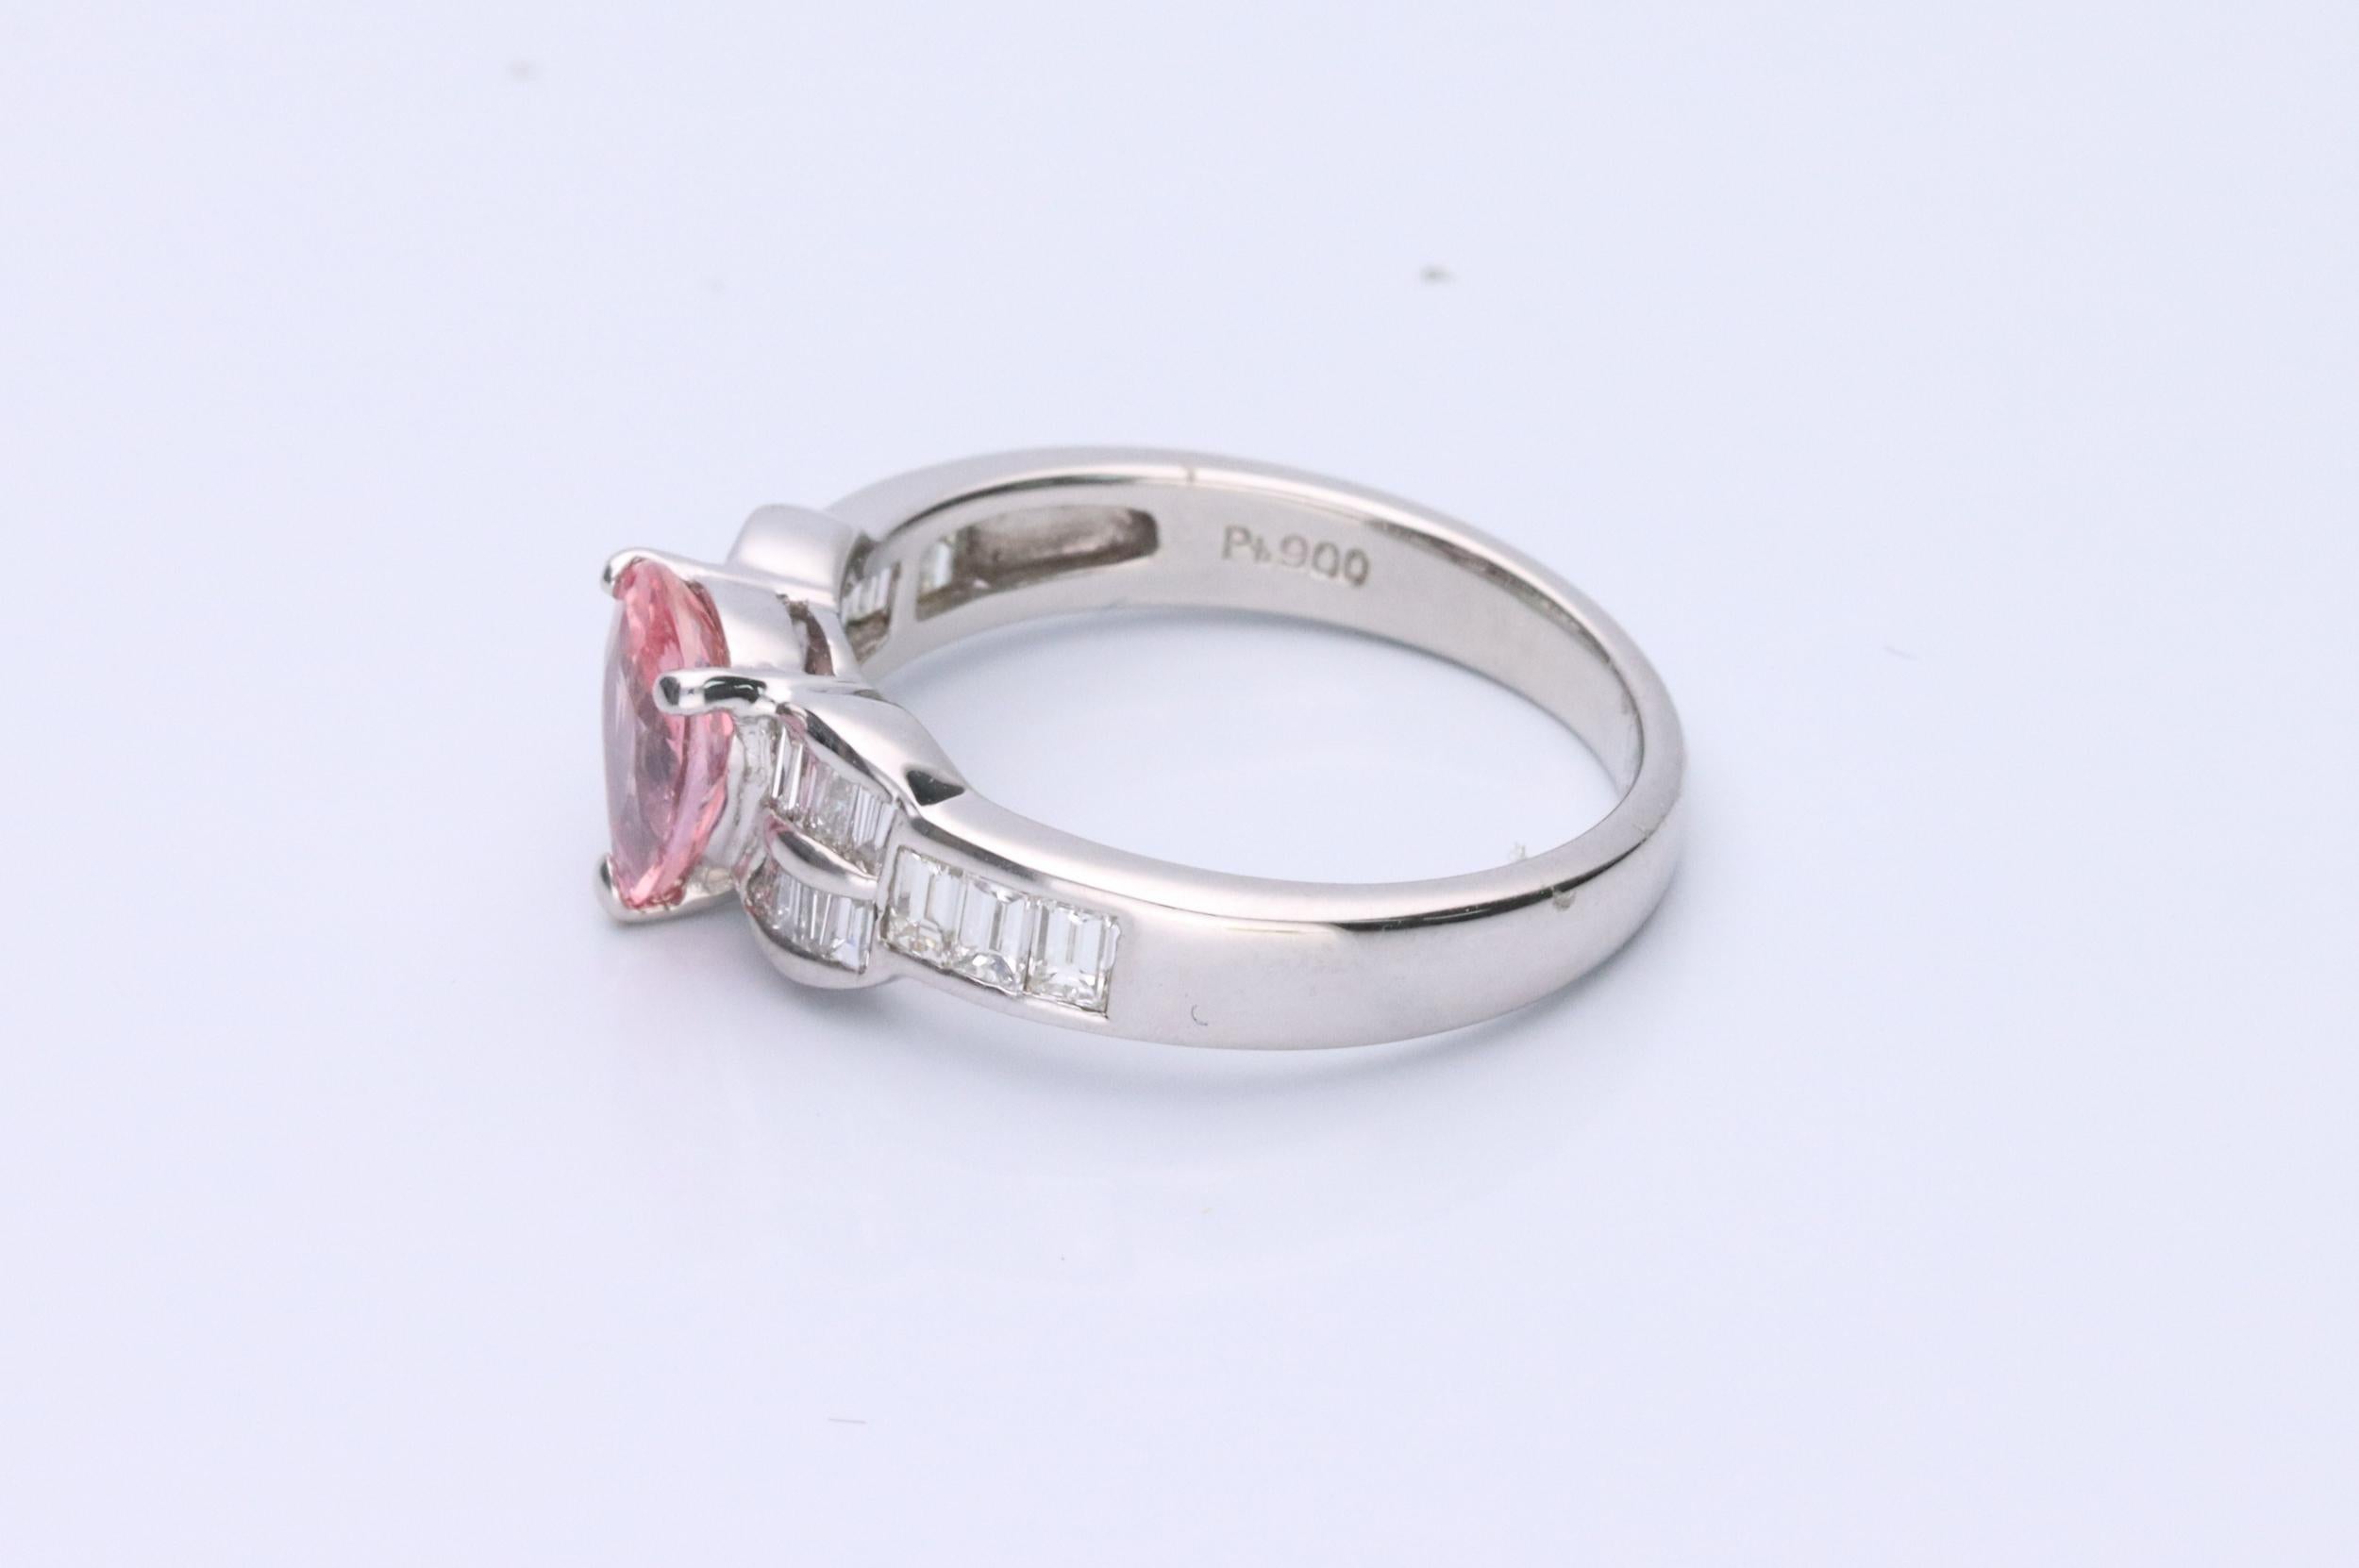 Decorate yourself in elegance with this Ring is crafted from Platinum 900 by Gin & Grace. This Ring is made up of Pear-Cut (1 pcs) 1.87 carat Pink Sapphire and Baguette-cut White Diamond 0.59 carat. This Ring is weight 5.50 grams. This delicate ring